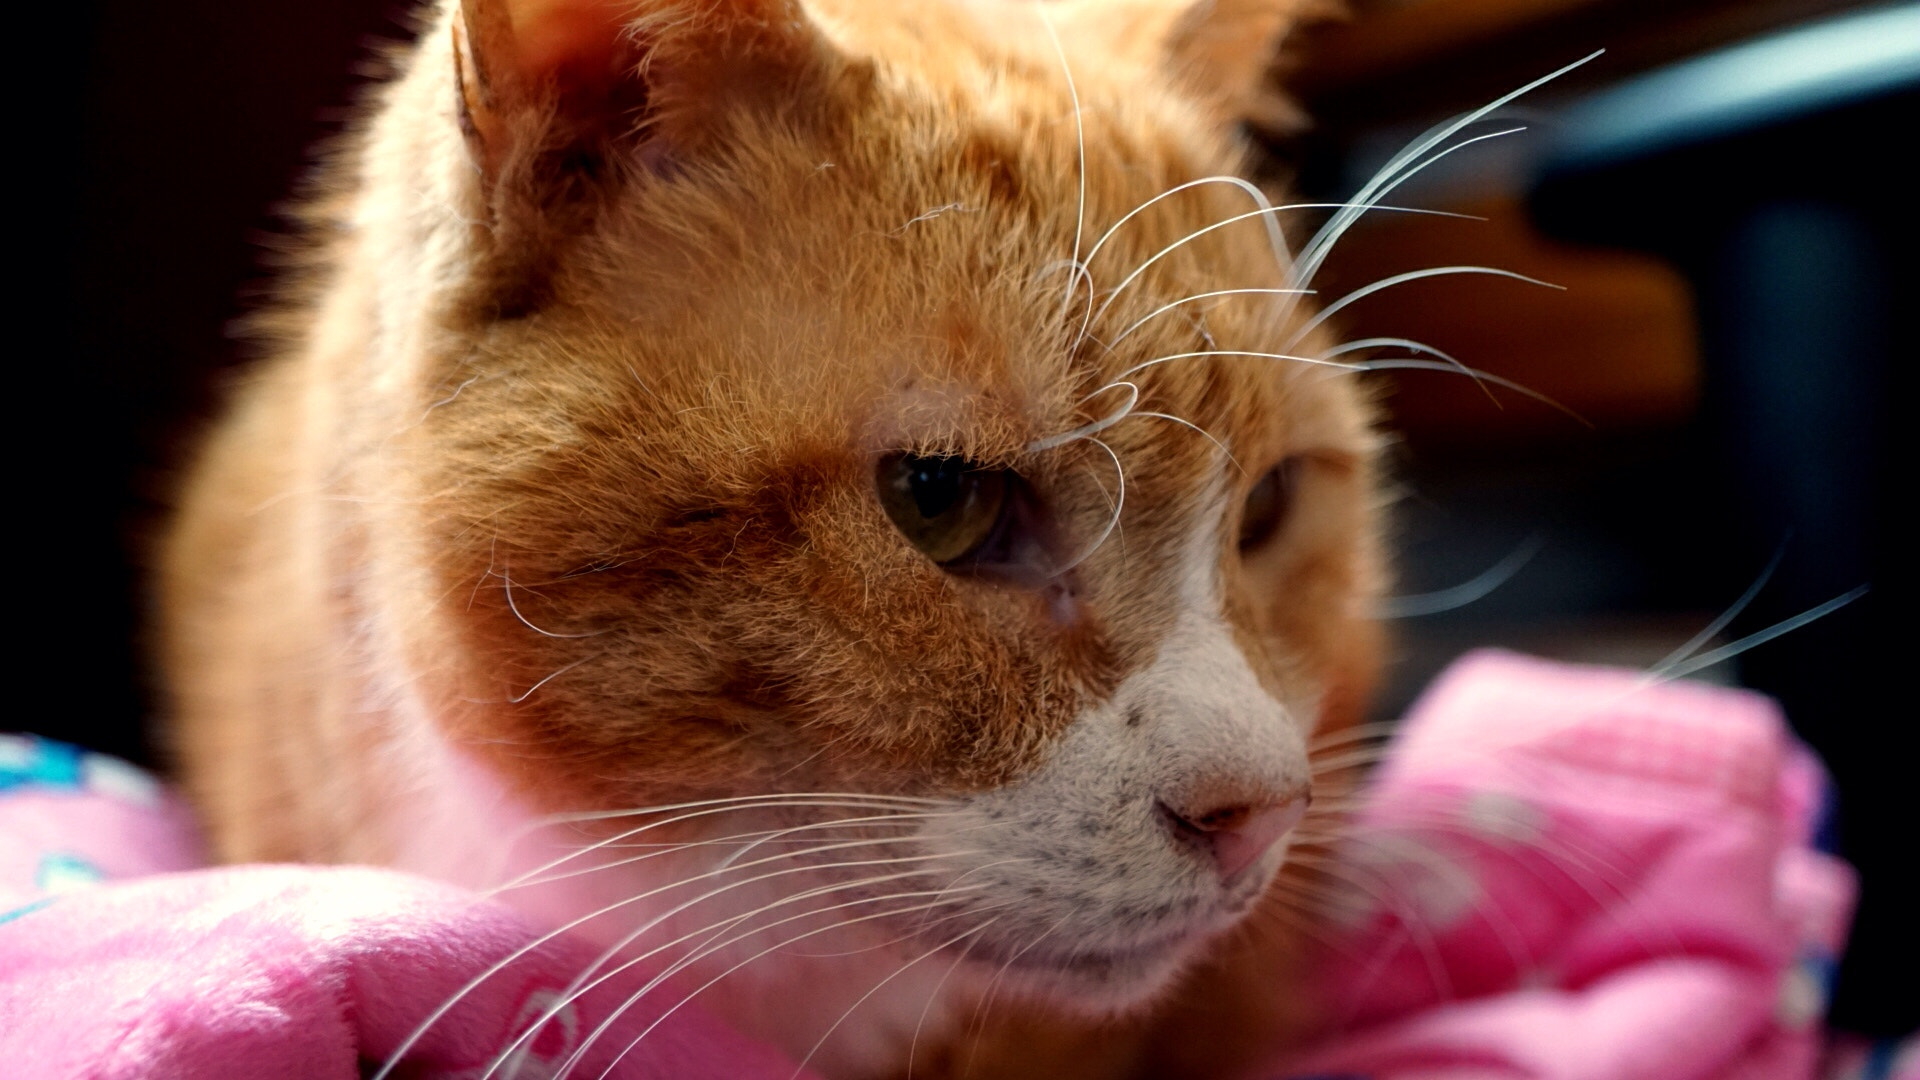 Sony a5100 sample photo. Their domesticated a cat photography